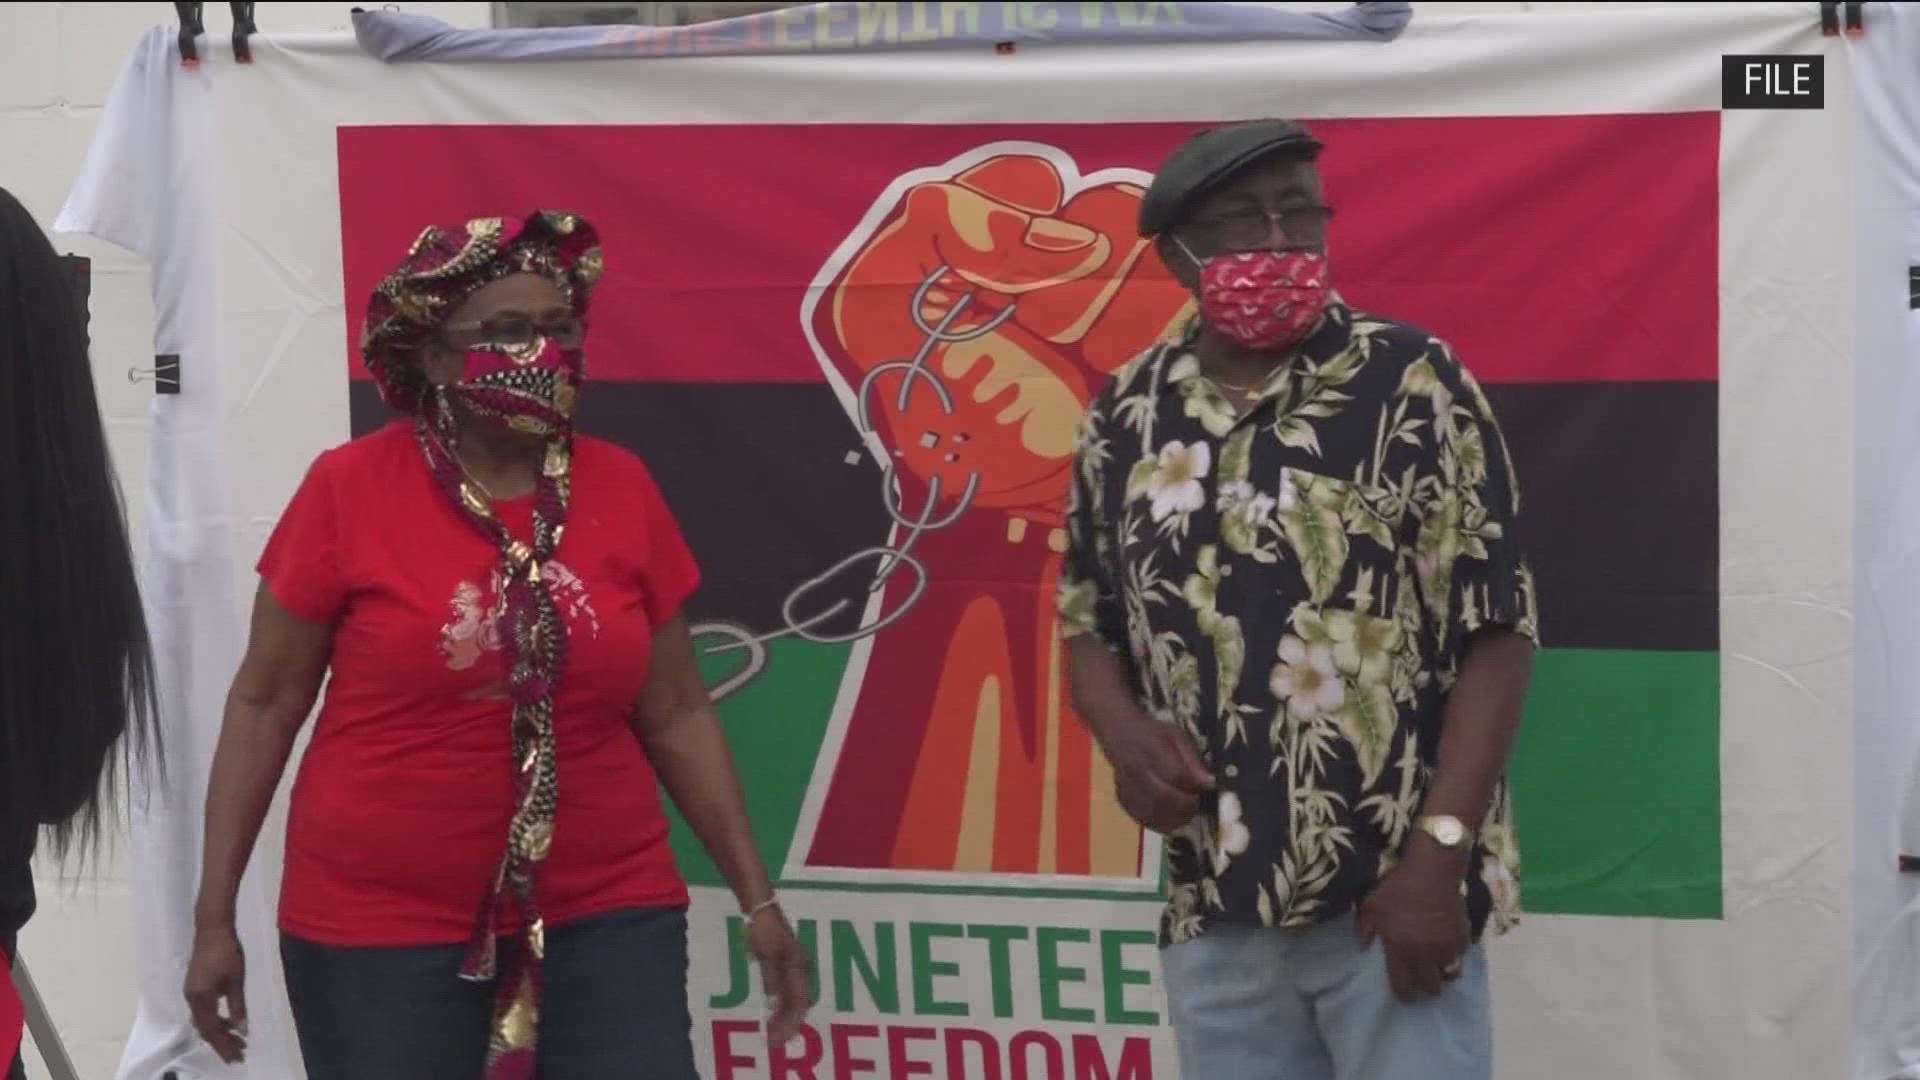 Find concerts, parties, parades, job fairs and more in honor of Juneteenth in Toledo.